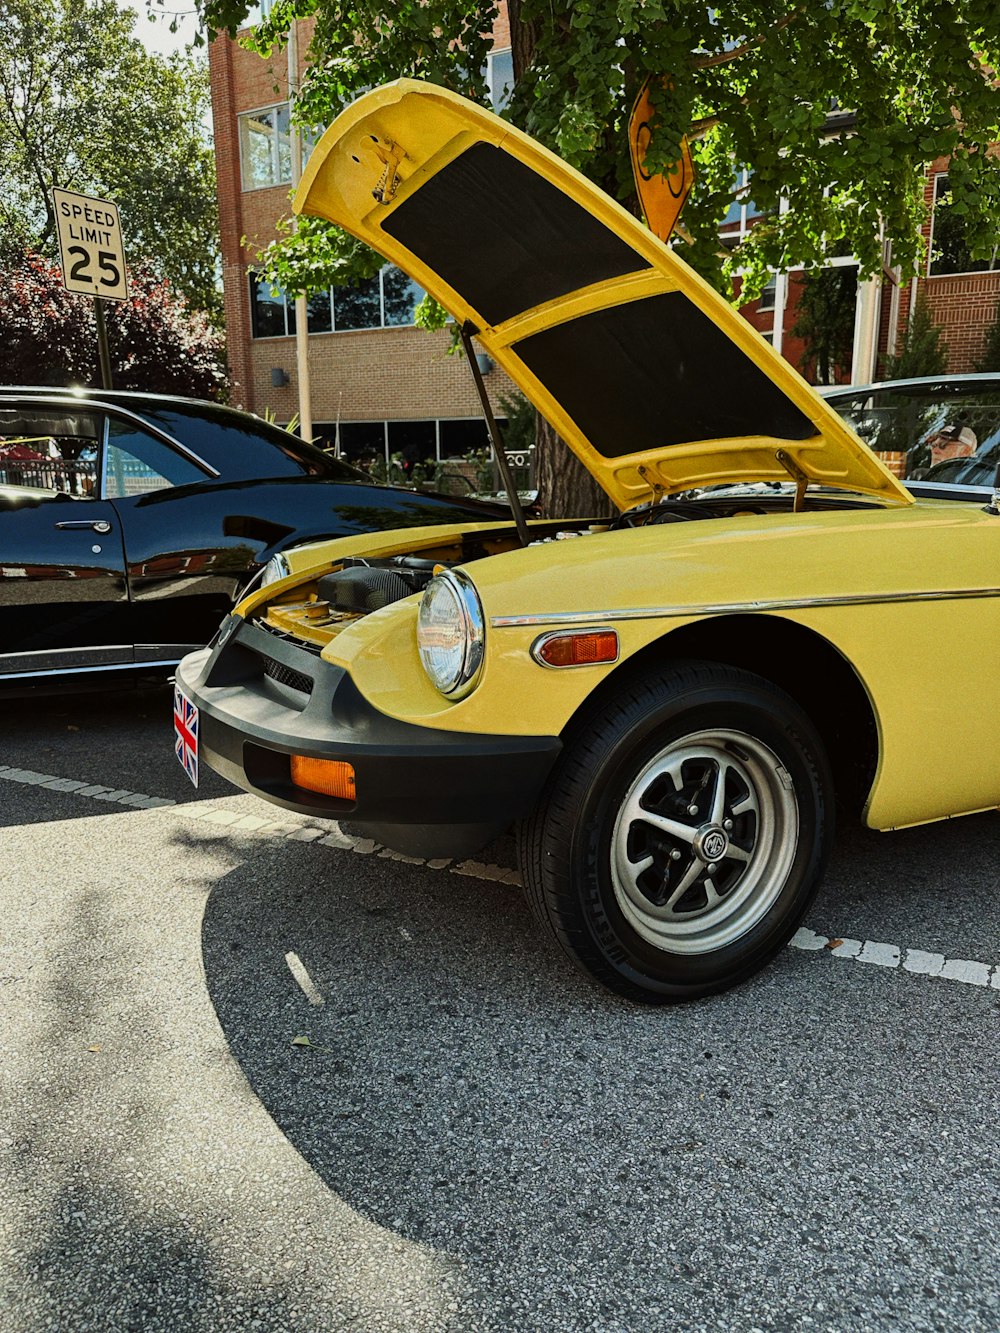 a yellow car with its hood open in a parking lot